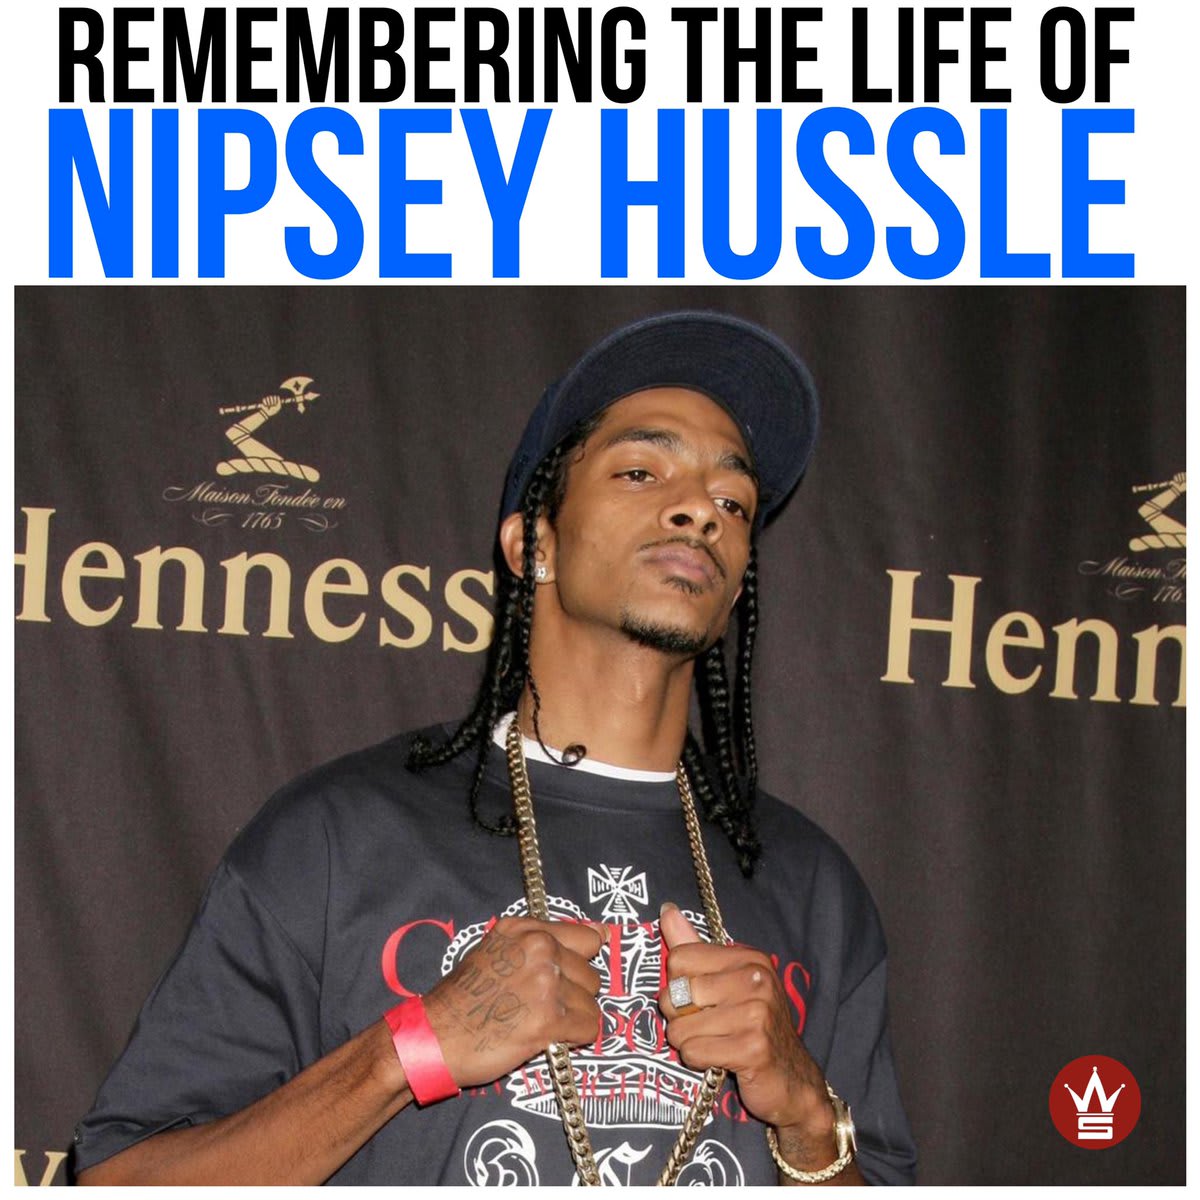 Today marks 2 years since the passing of #NipseyHussle. Our thoughts and prayers continue to be with his friends and family. What’s your favorite song of his?